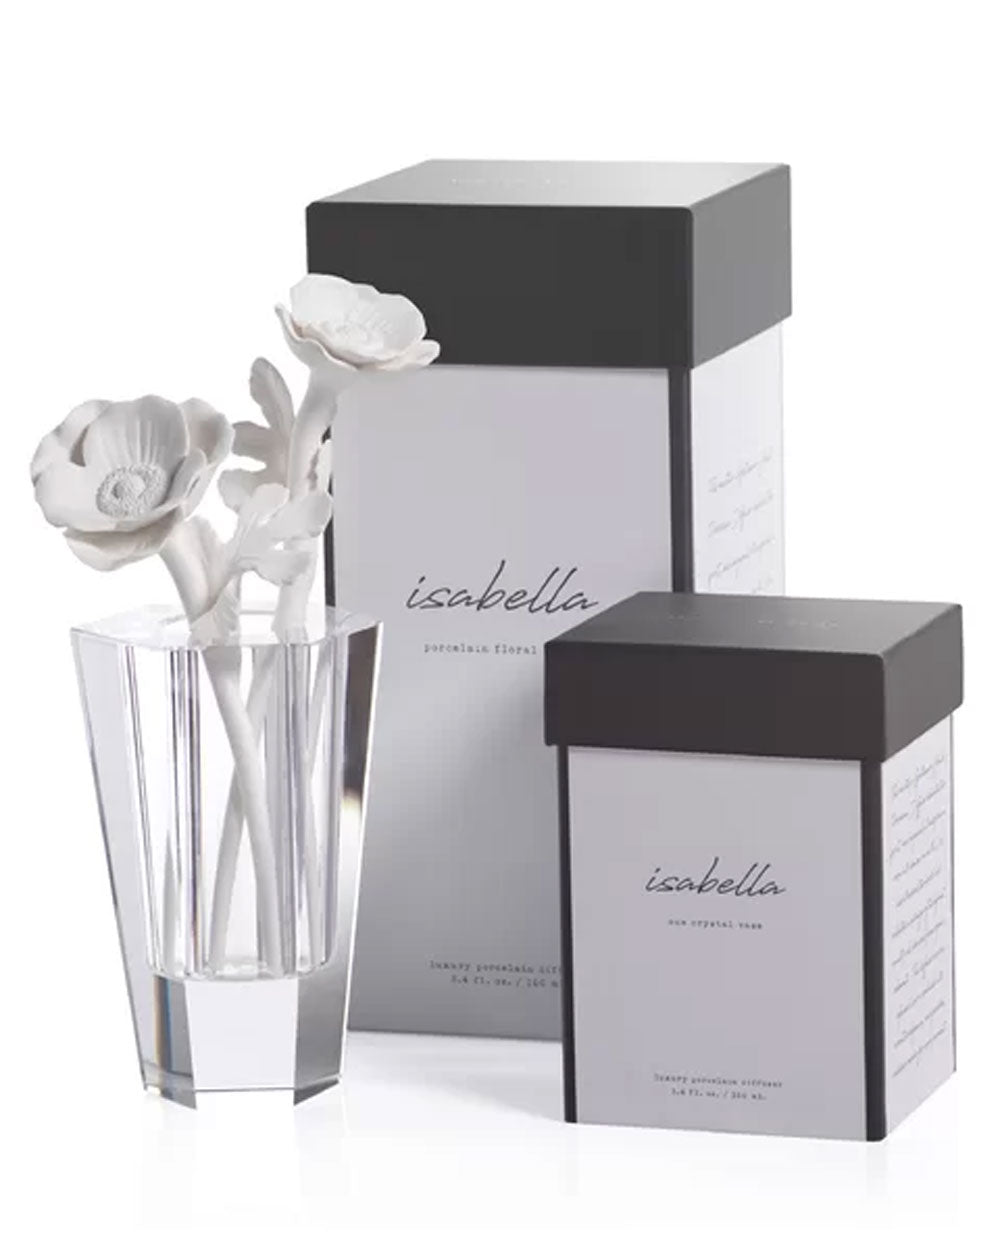 Isabella Porcelain Diffuser Moroccan Peony